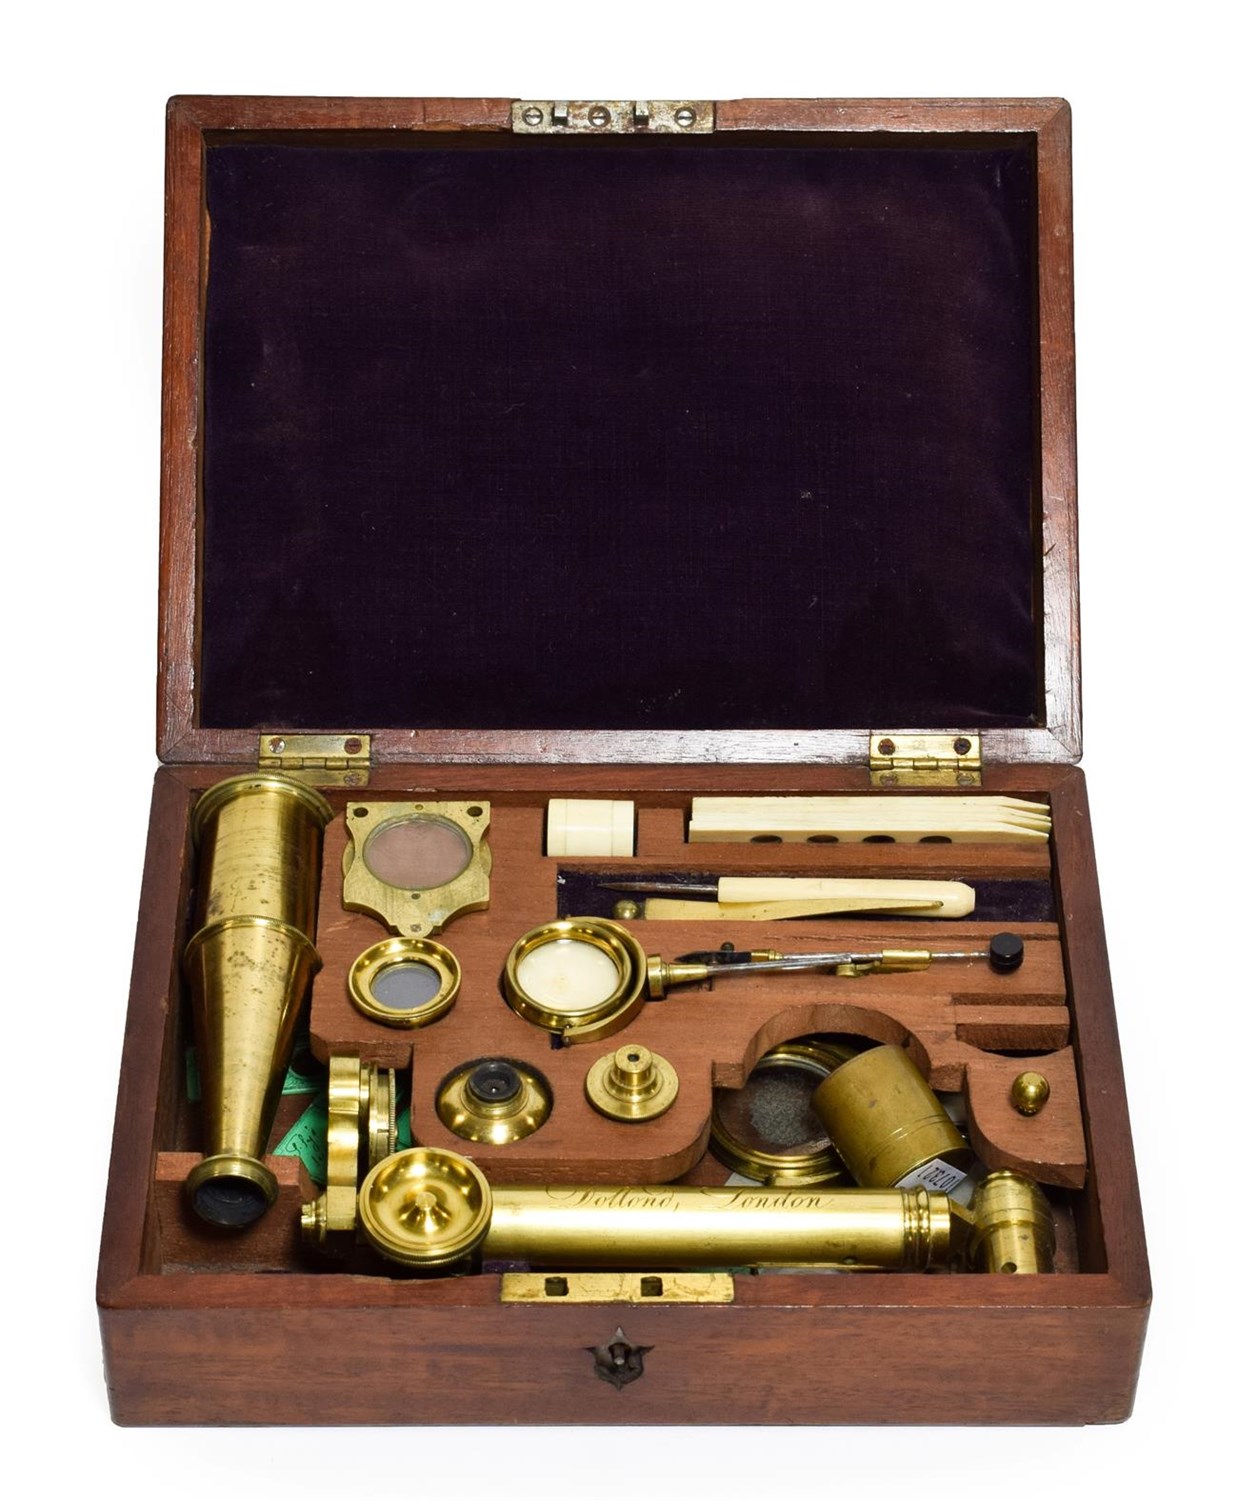 Lot 3151 - Dollond Travelling Microscope brass, with base engraved with makes name 'Dollond London' and...